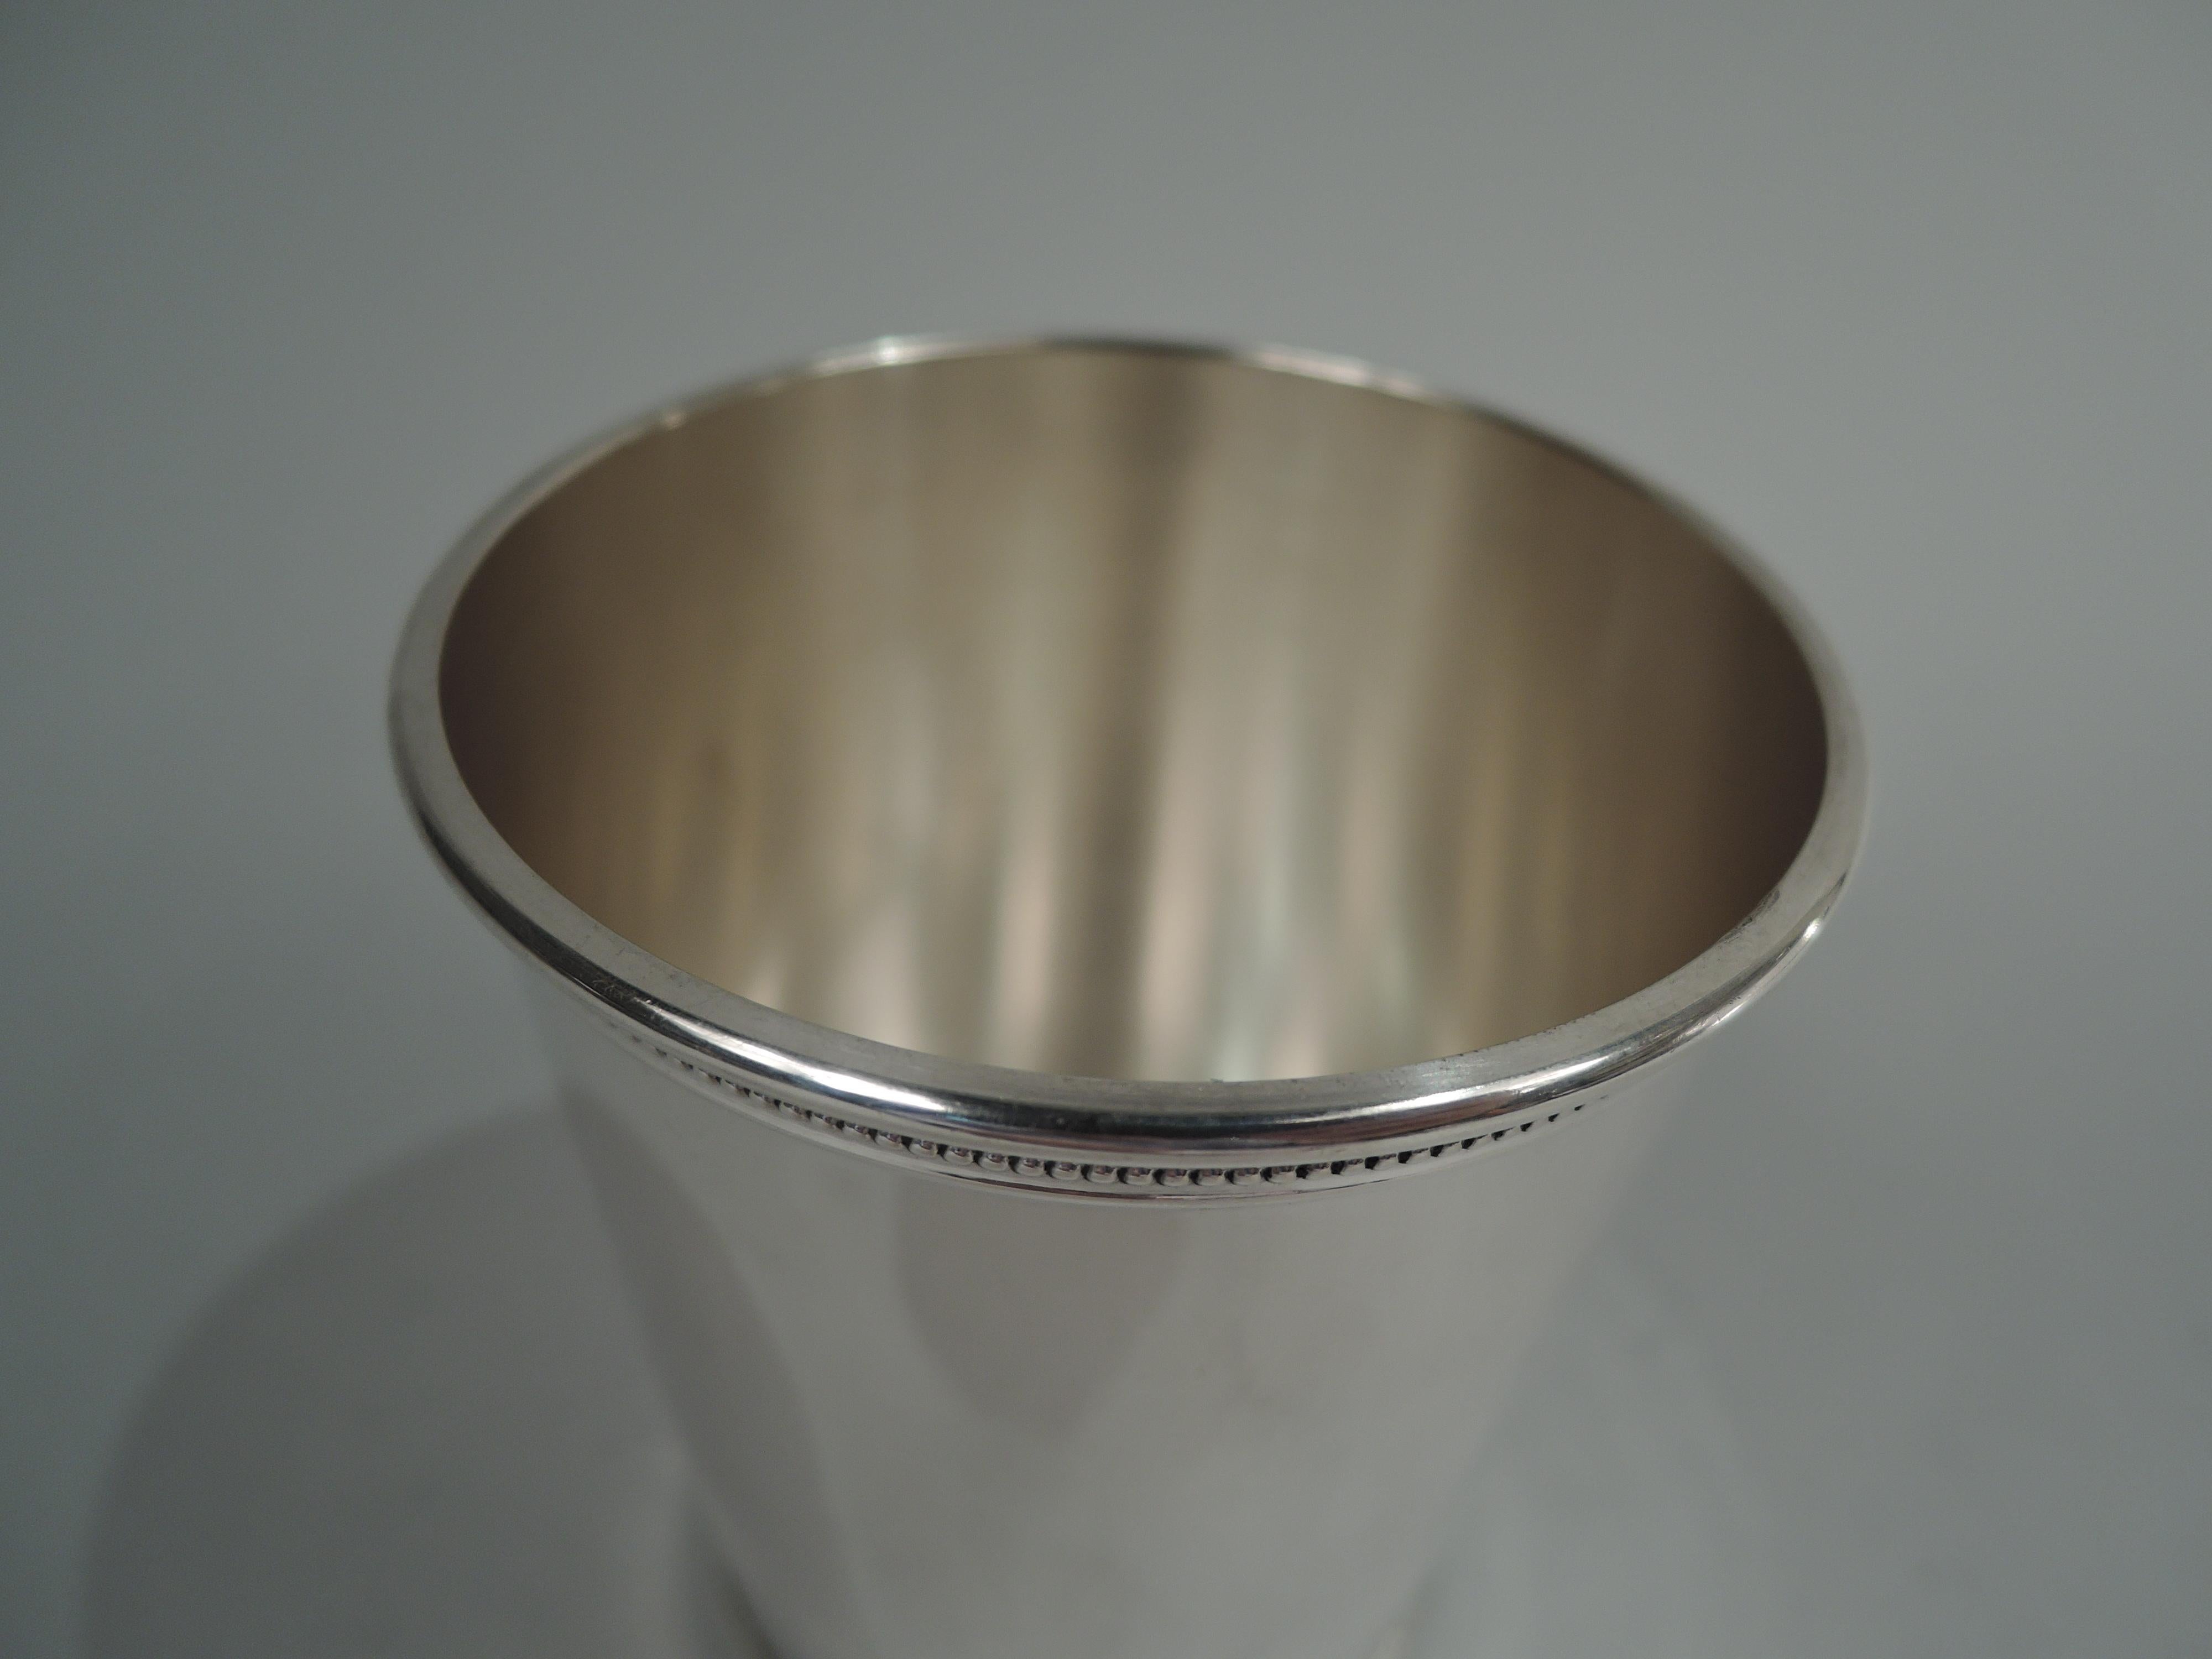 JFK-era sterling silver mint julep. Retailed by Scearce in Kentucky. Traditional form with tapering sides and beaded rims. A hard-to-find cup from Kennedy’s incomplete single term (1961-3). Fully marked including retailer’s stamp and presidential